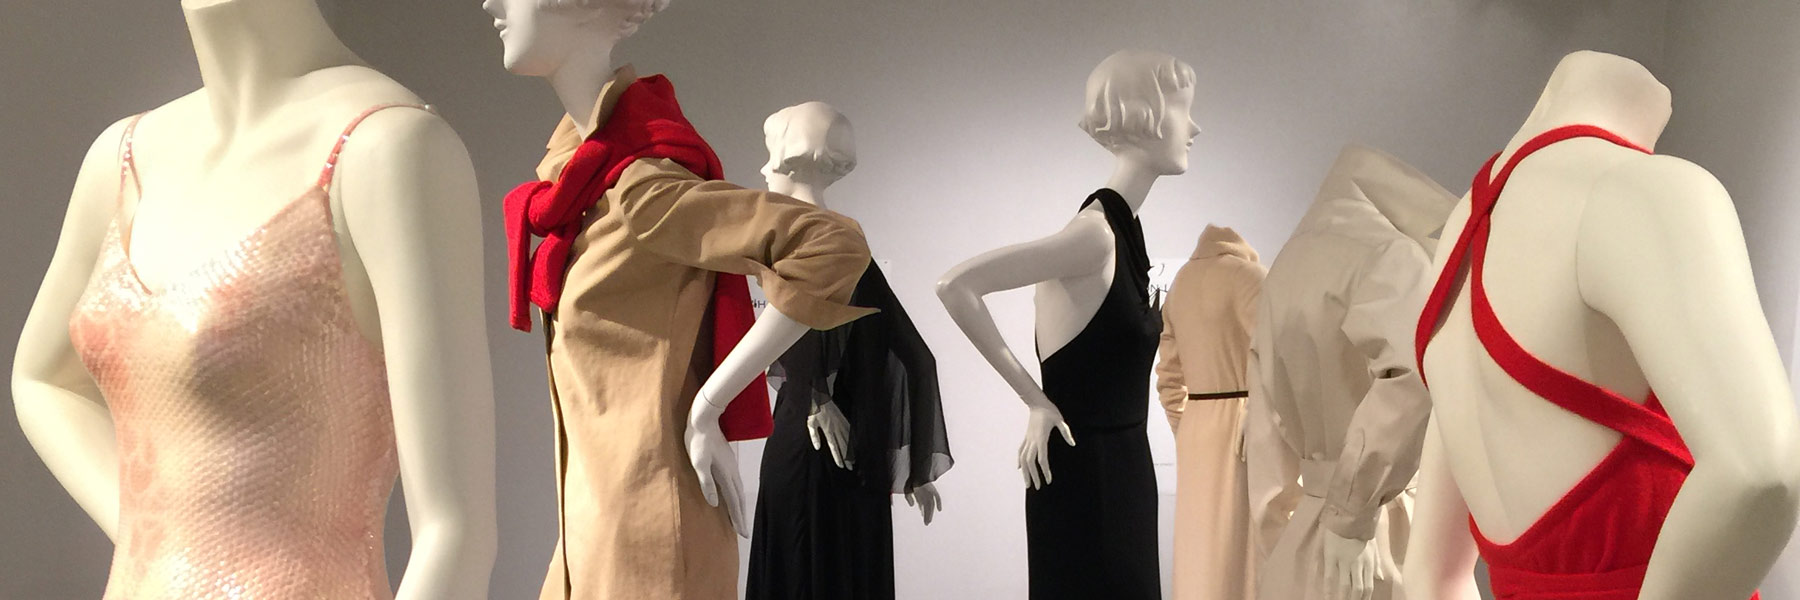 Mannequins wearing outfits.